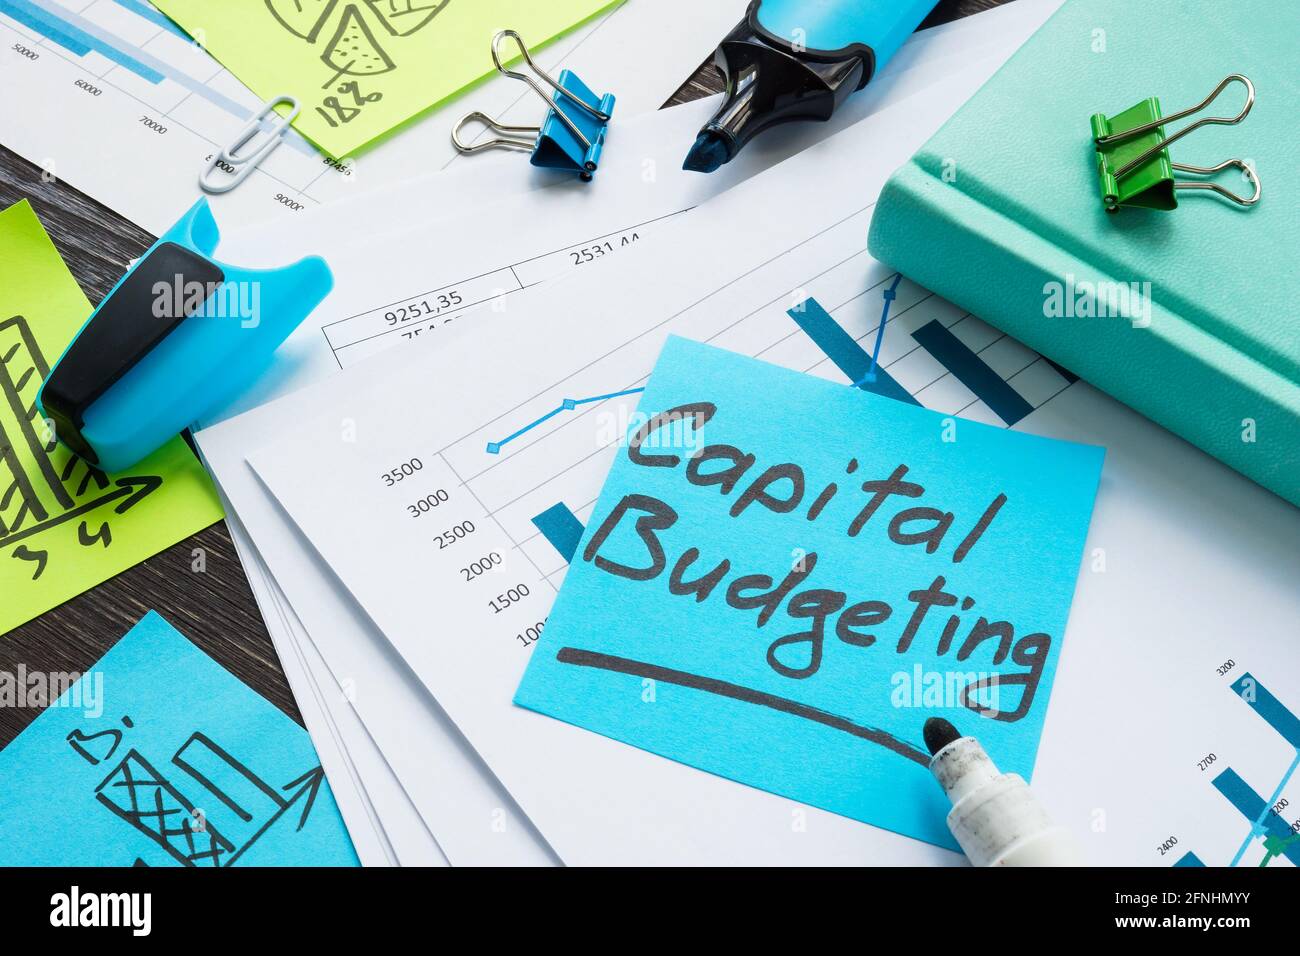 Papers with capital budgeting and business charts. Stock Photo